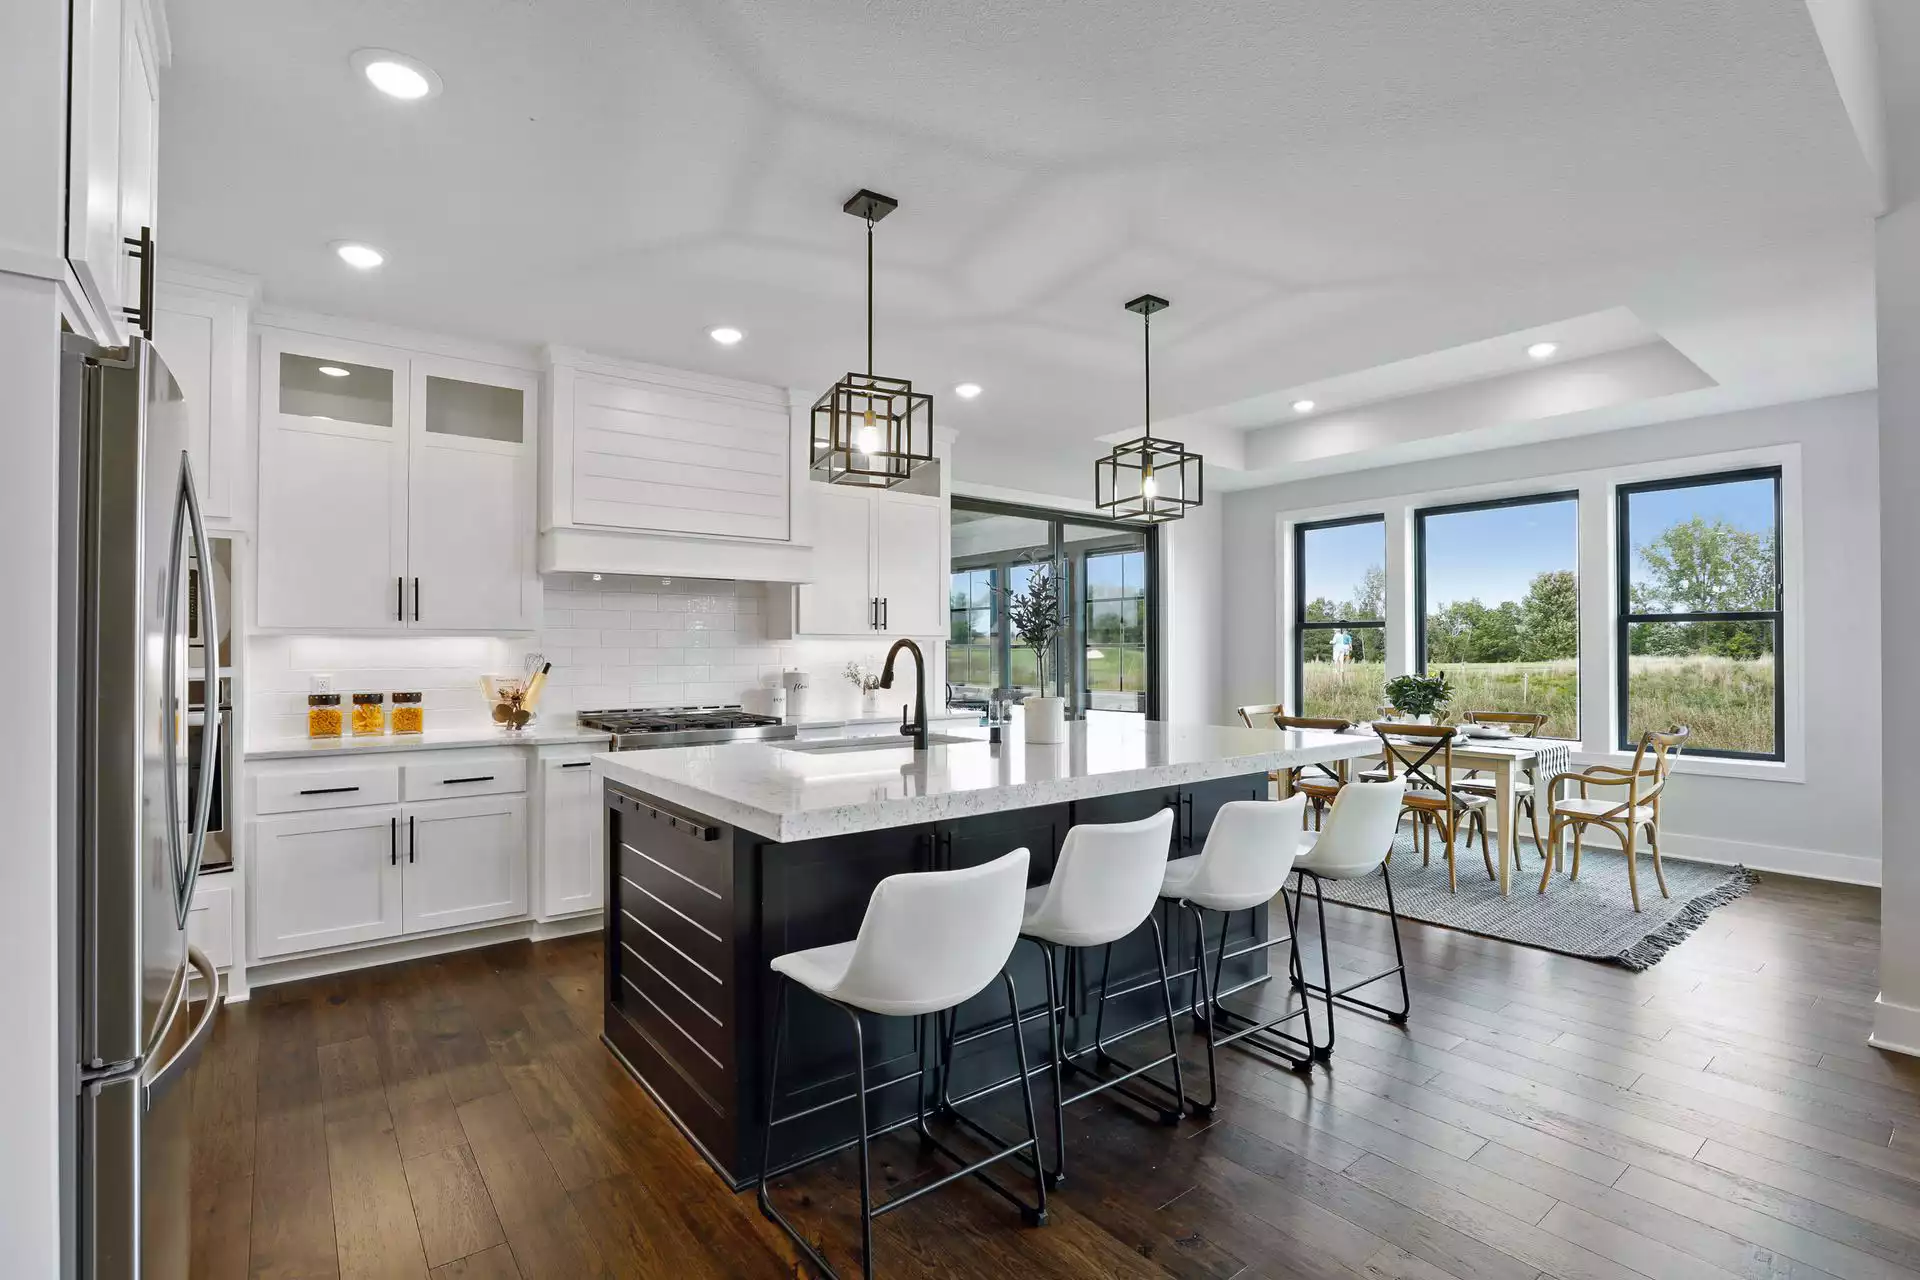 Beautiful white kitchen with wood floors